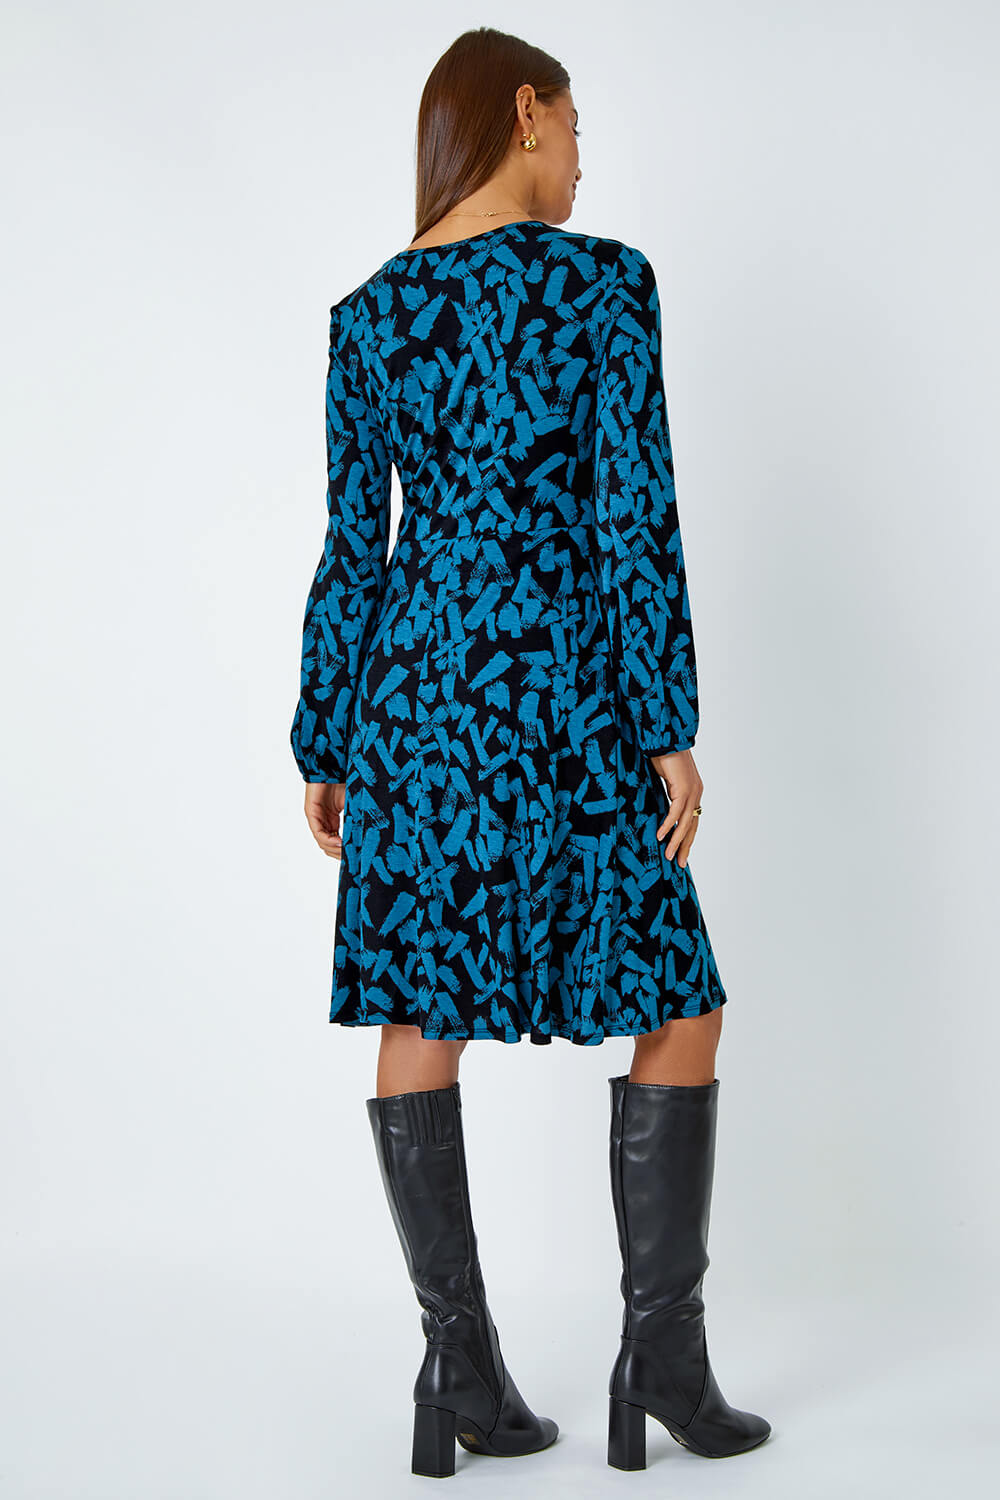 Blue Abstract Print Swing Stretch Dress, Image 3 of 5